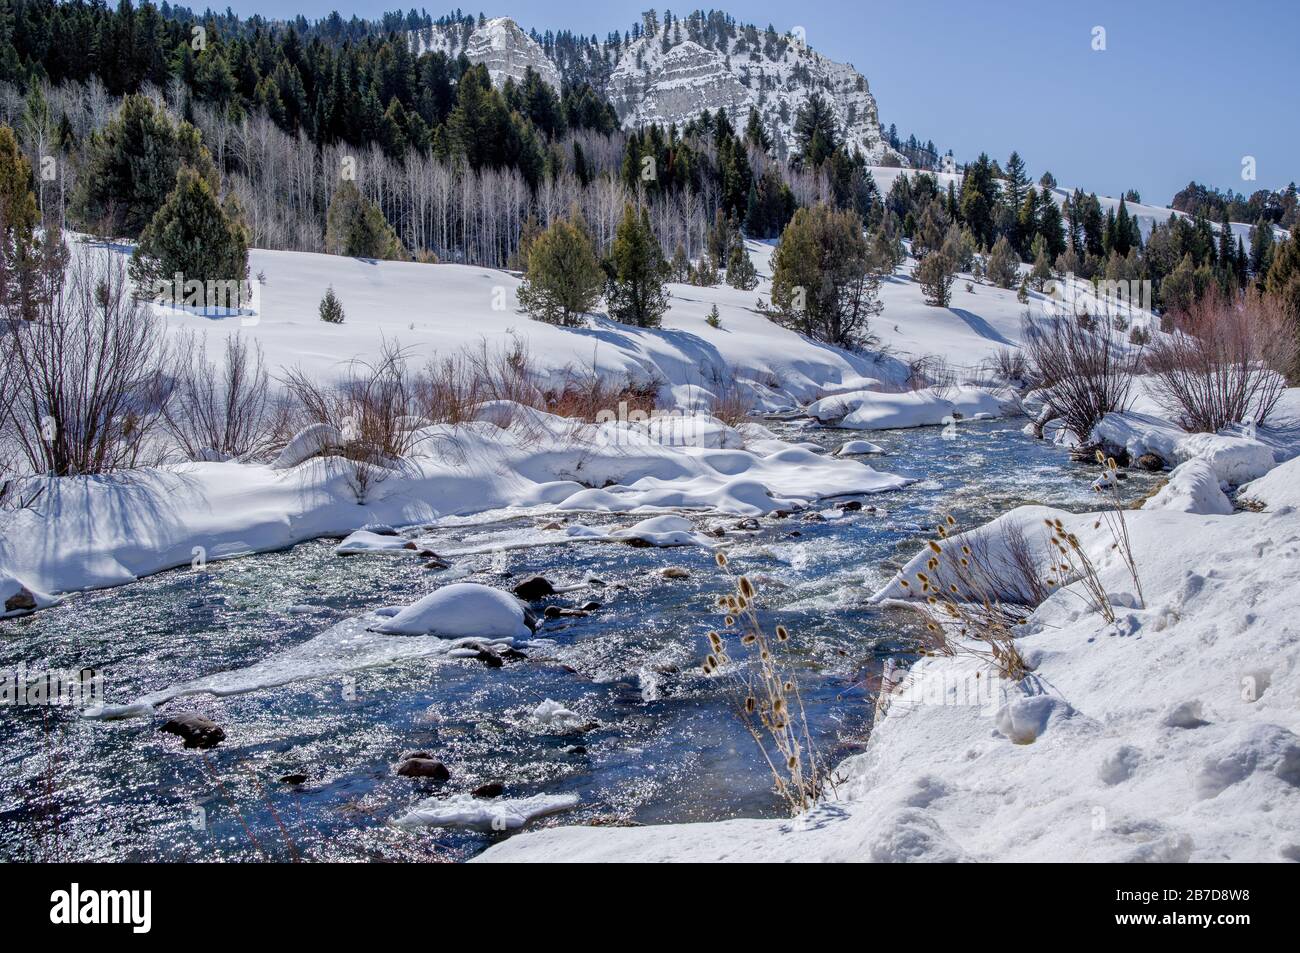 Icy Mountain Stream in Utah:  Bright sunlight sparkles on the surface of a stream flowing through ice and snow in the Mt. Naomi Wilderness Area. Stock Photo